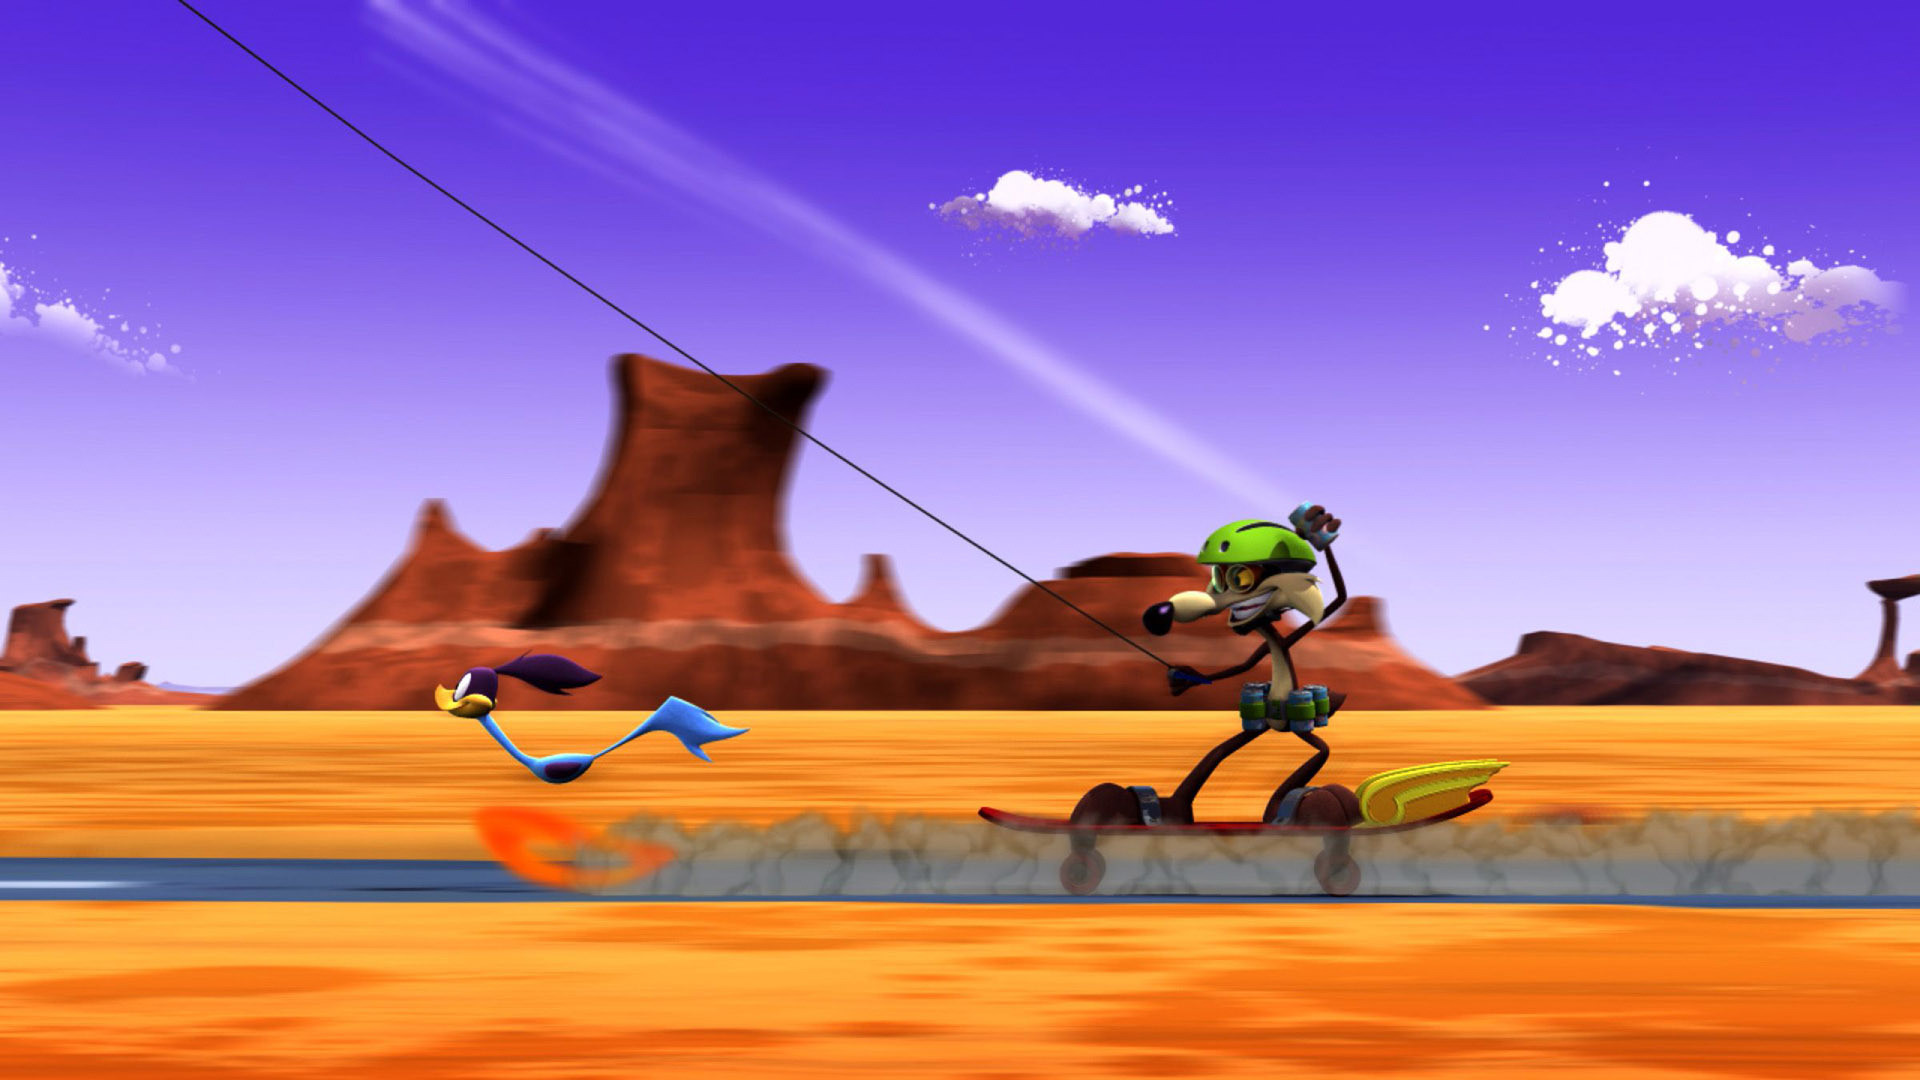 1920x1080 Wile E. Coyote and The Road Runner HD Wallpaper 